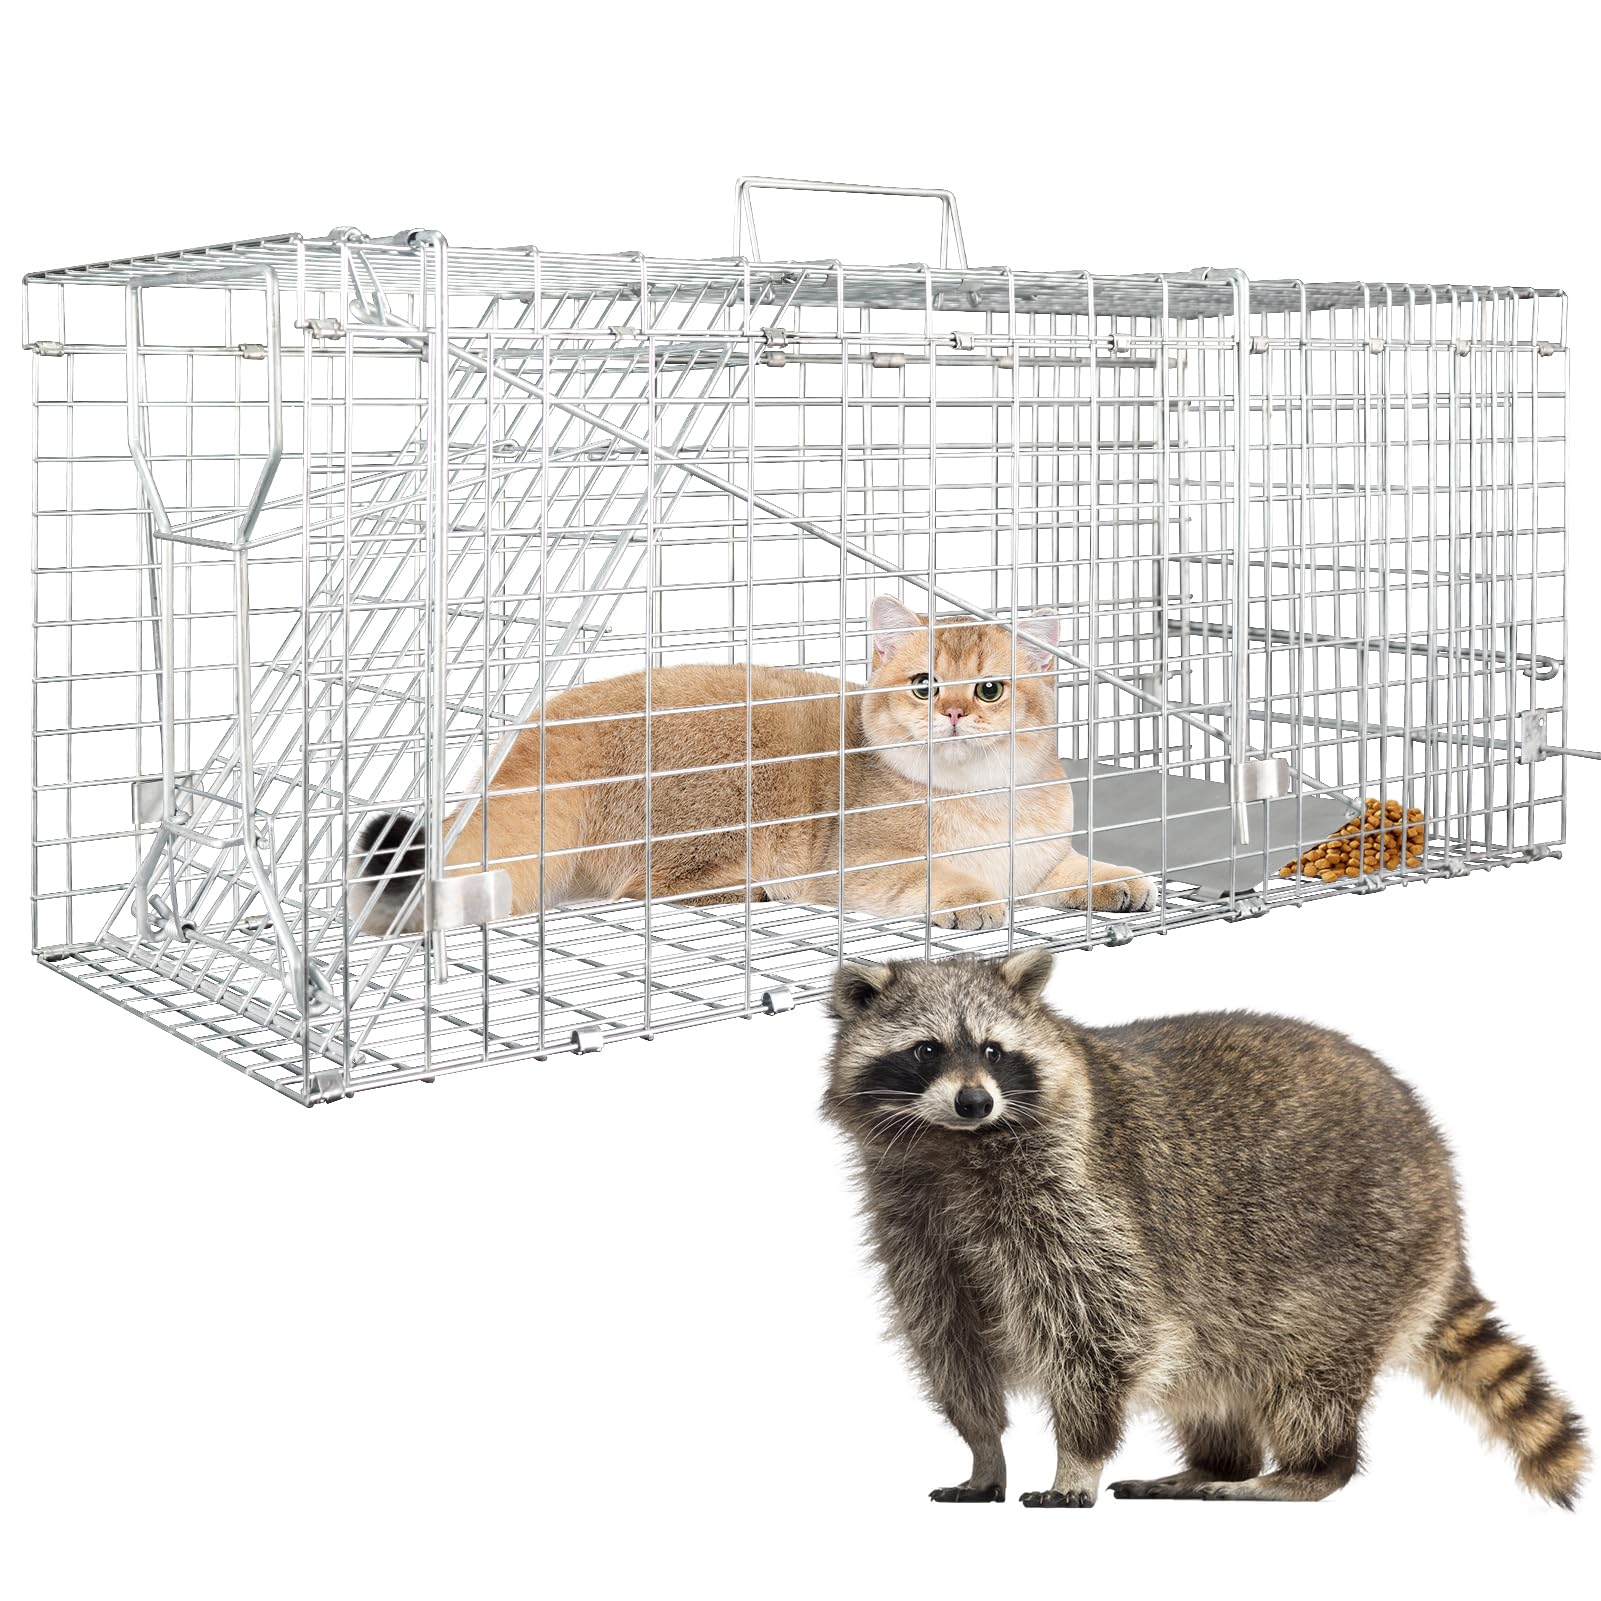 Live Animal Trap for Possum, Groundhog,Gopher,Beaver,Folding Raccoon Trap,Humane Live Animal Cage, Humane Small Animal Trap 32 X 12 X 12.5Inch Animal Trap,Catch & Release,Easy Installation and Use